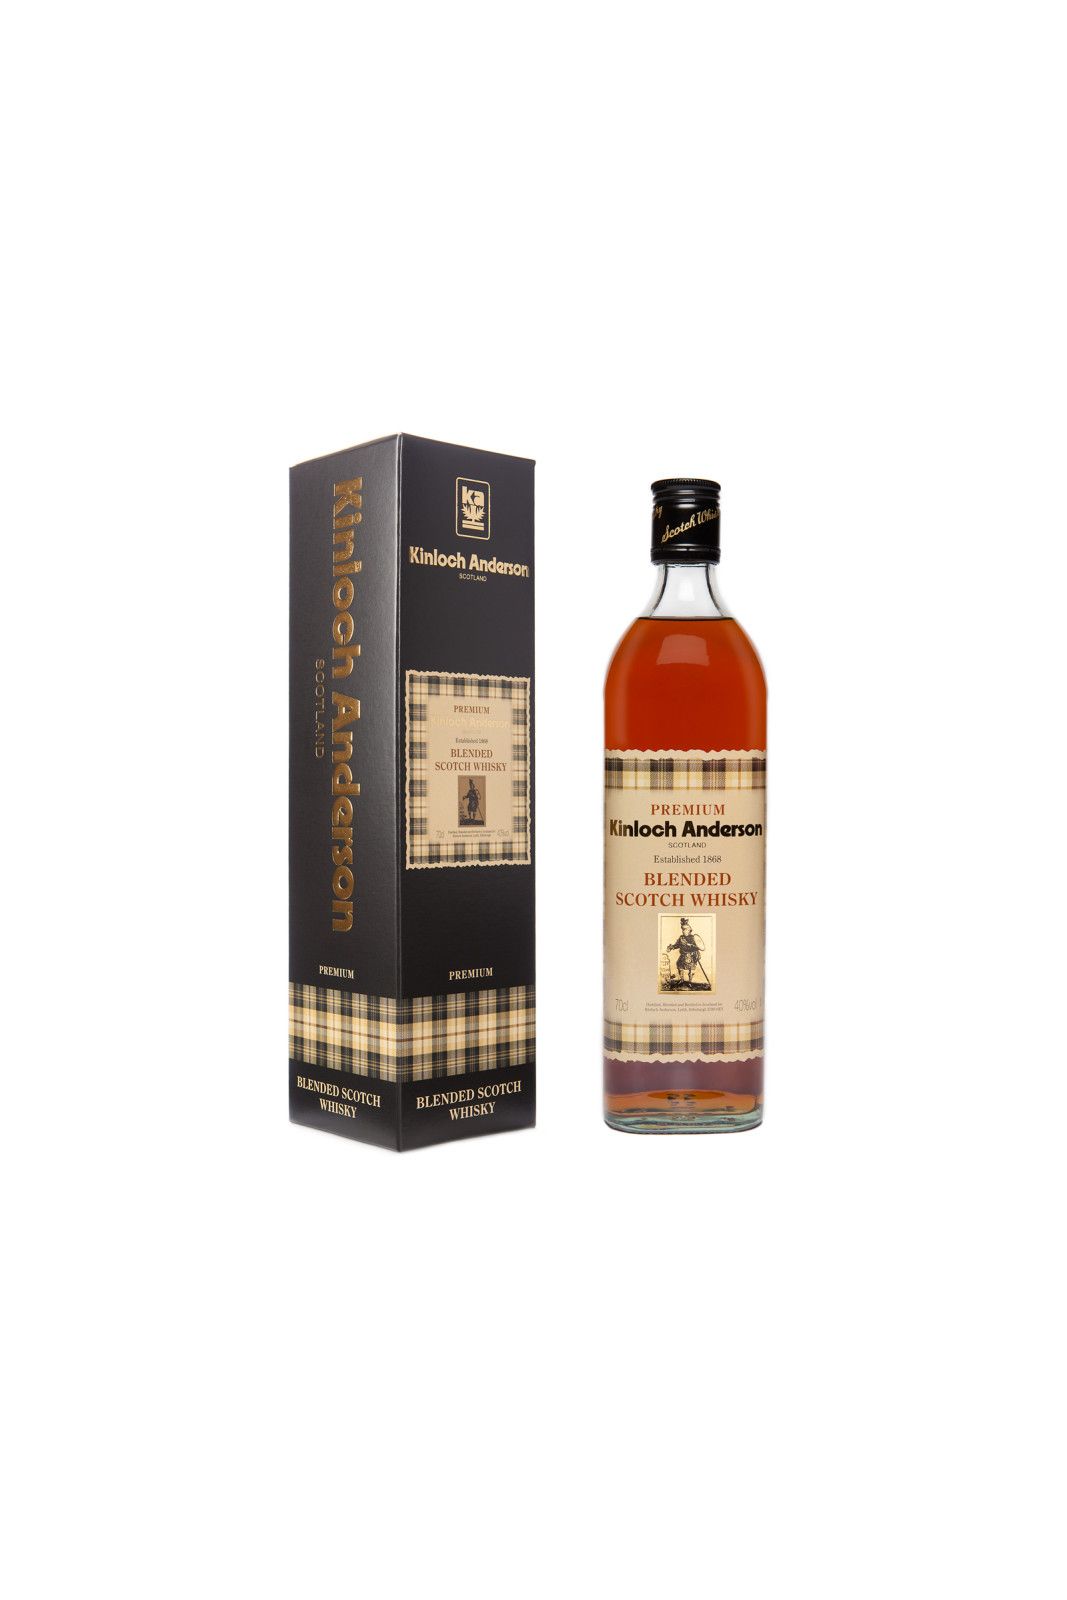 Kinloch Anderson Premium Blended Scotch Whisky - REDUCED TO CLEAR